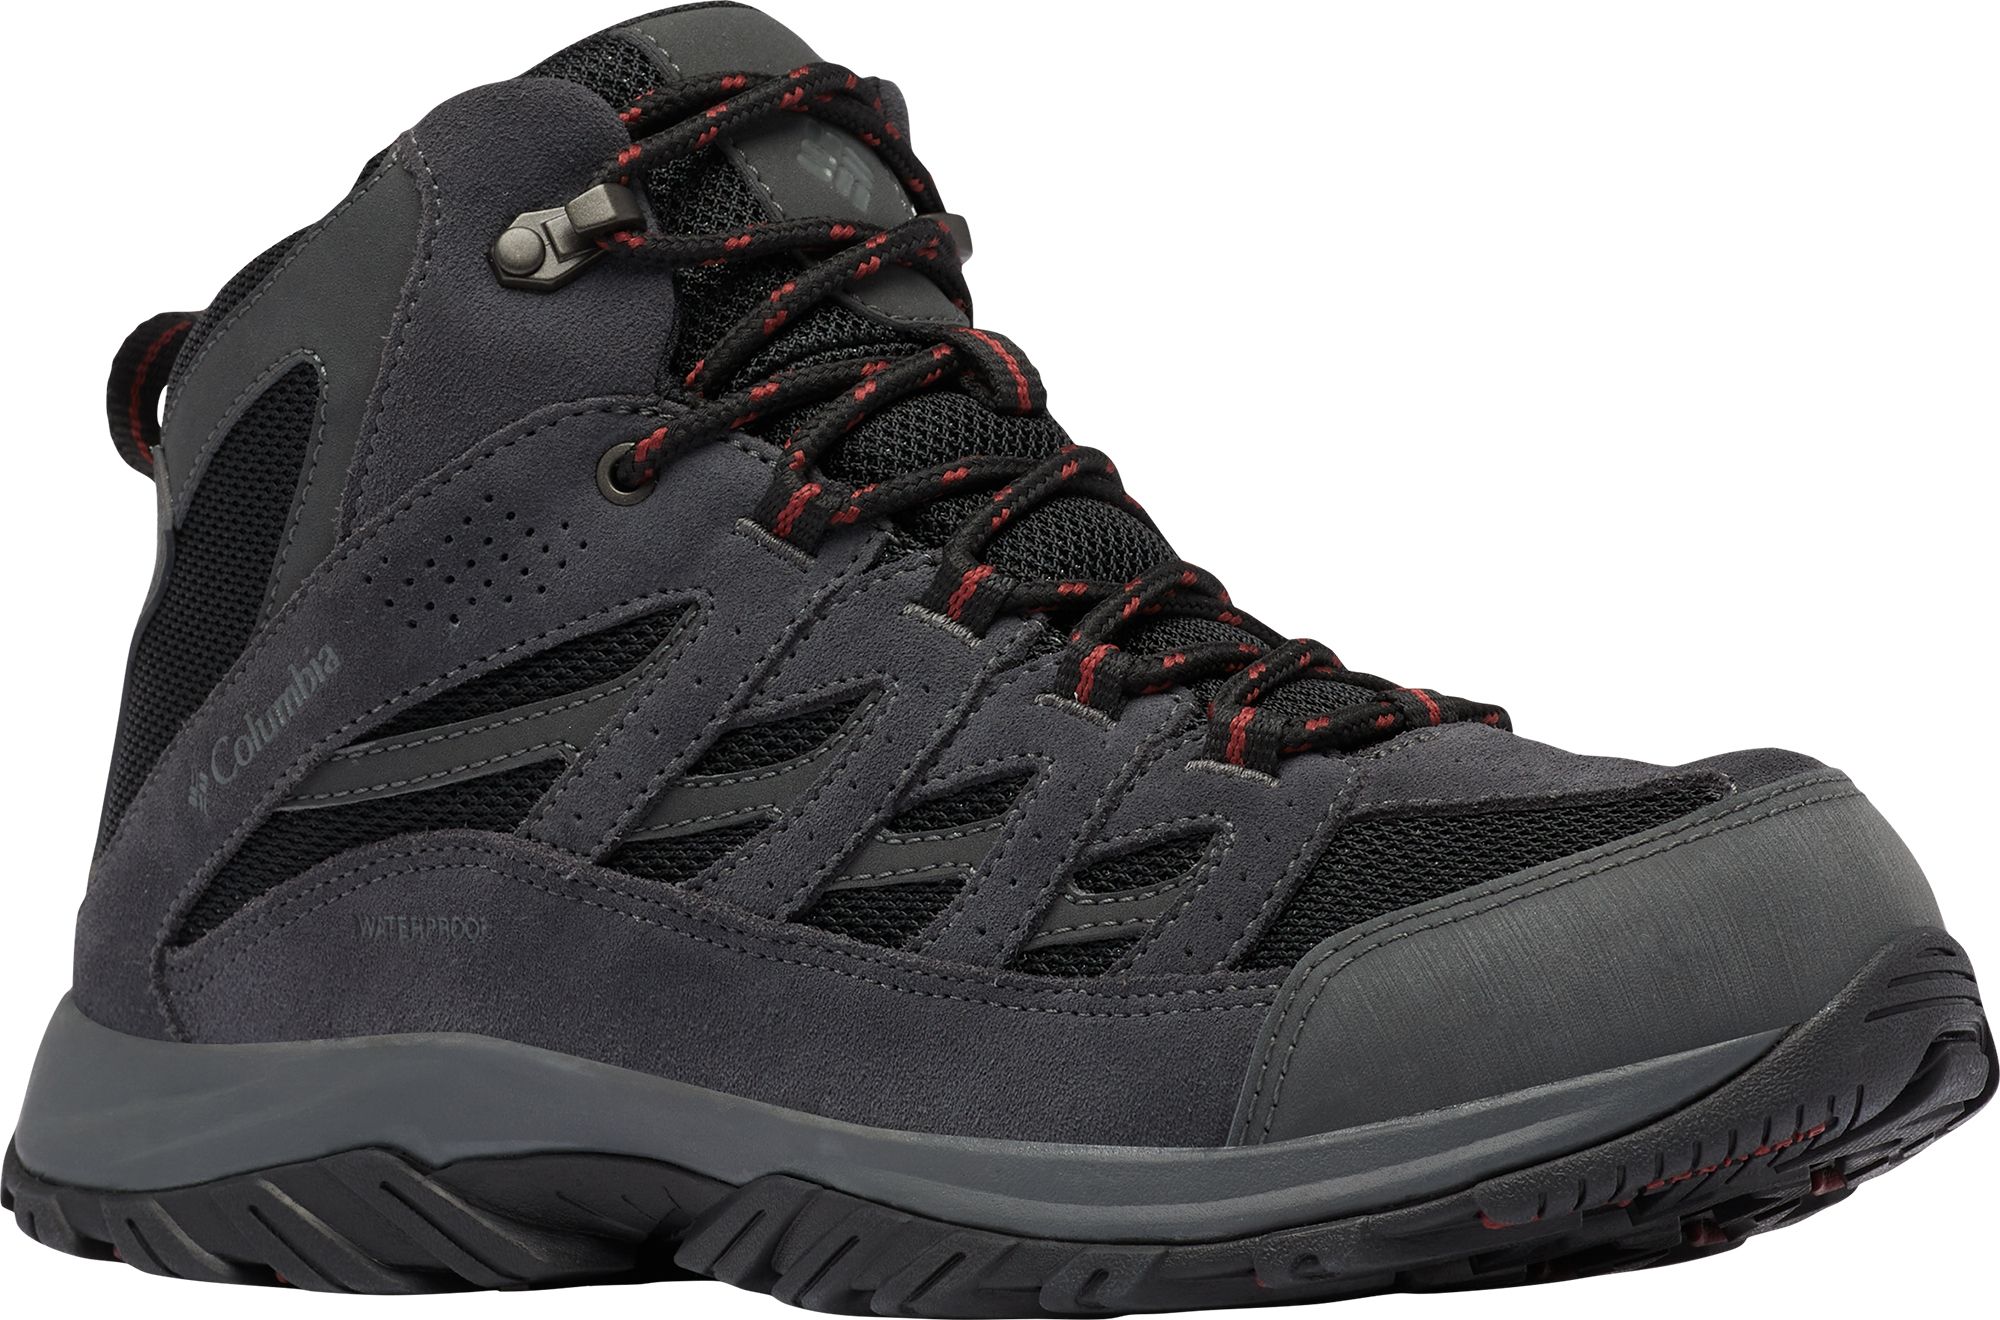 Photos - Trekking Shoes Columbia Men's Crestwood Mid Waterproof Hiking Boots, Size 9.5, Black/Char 